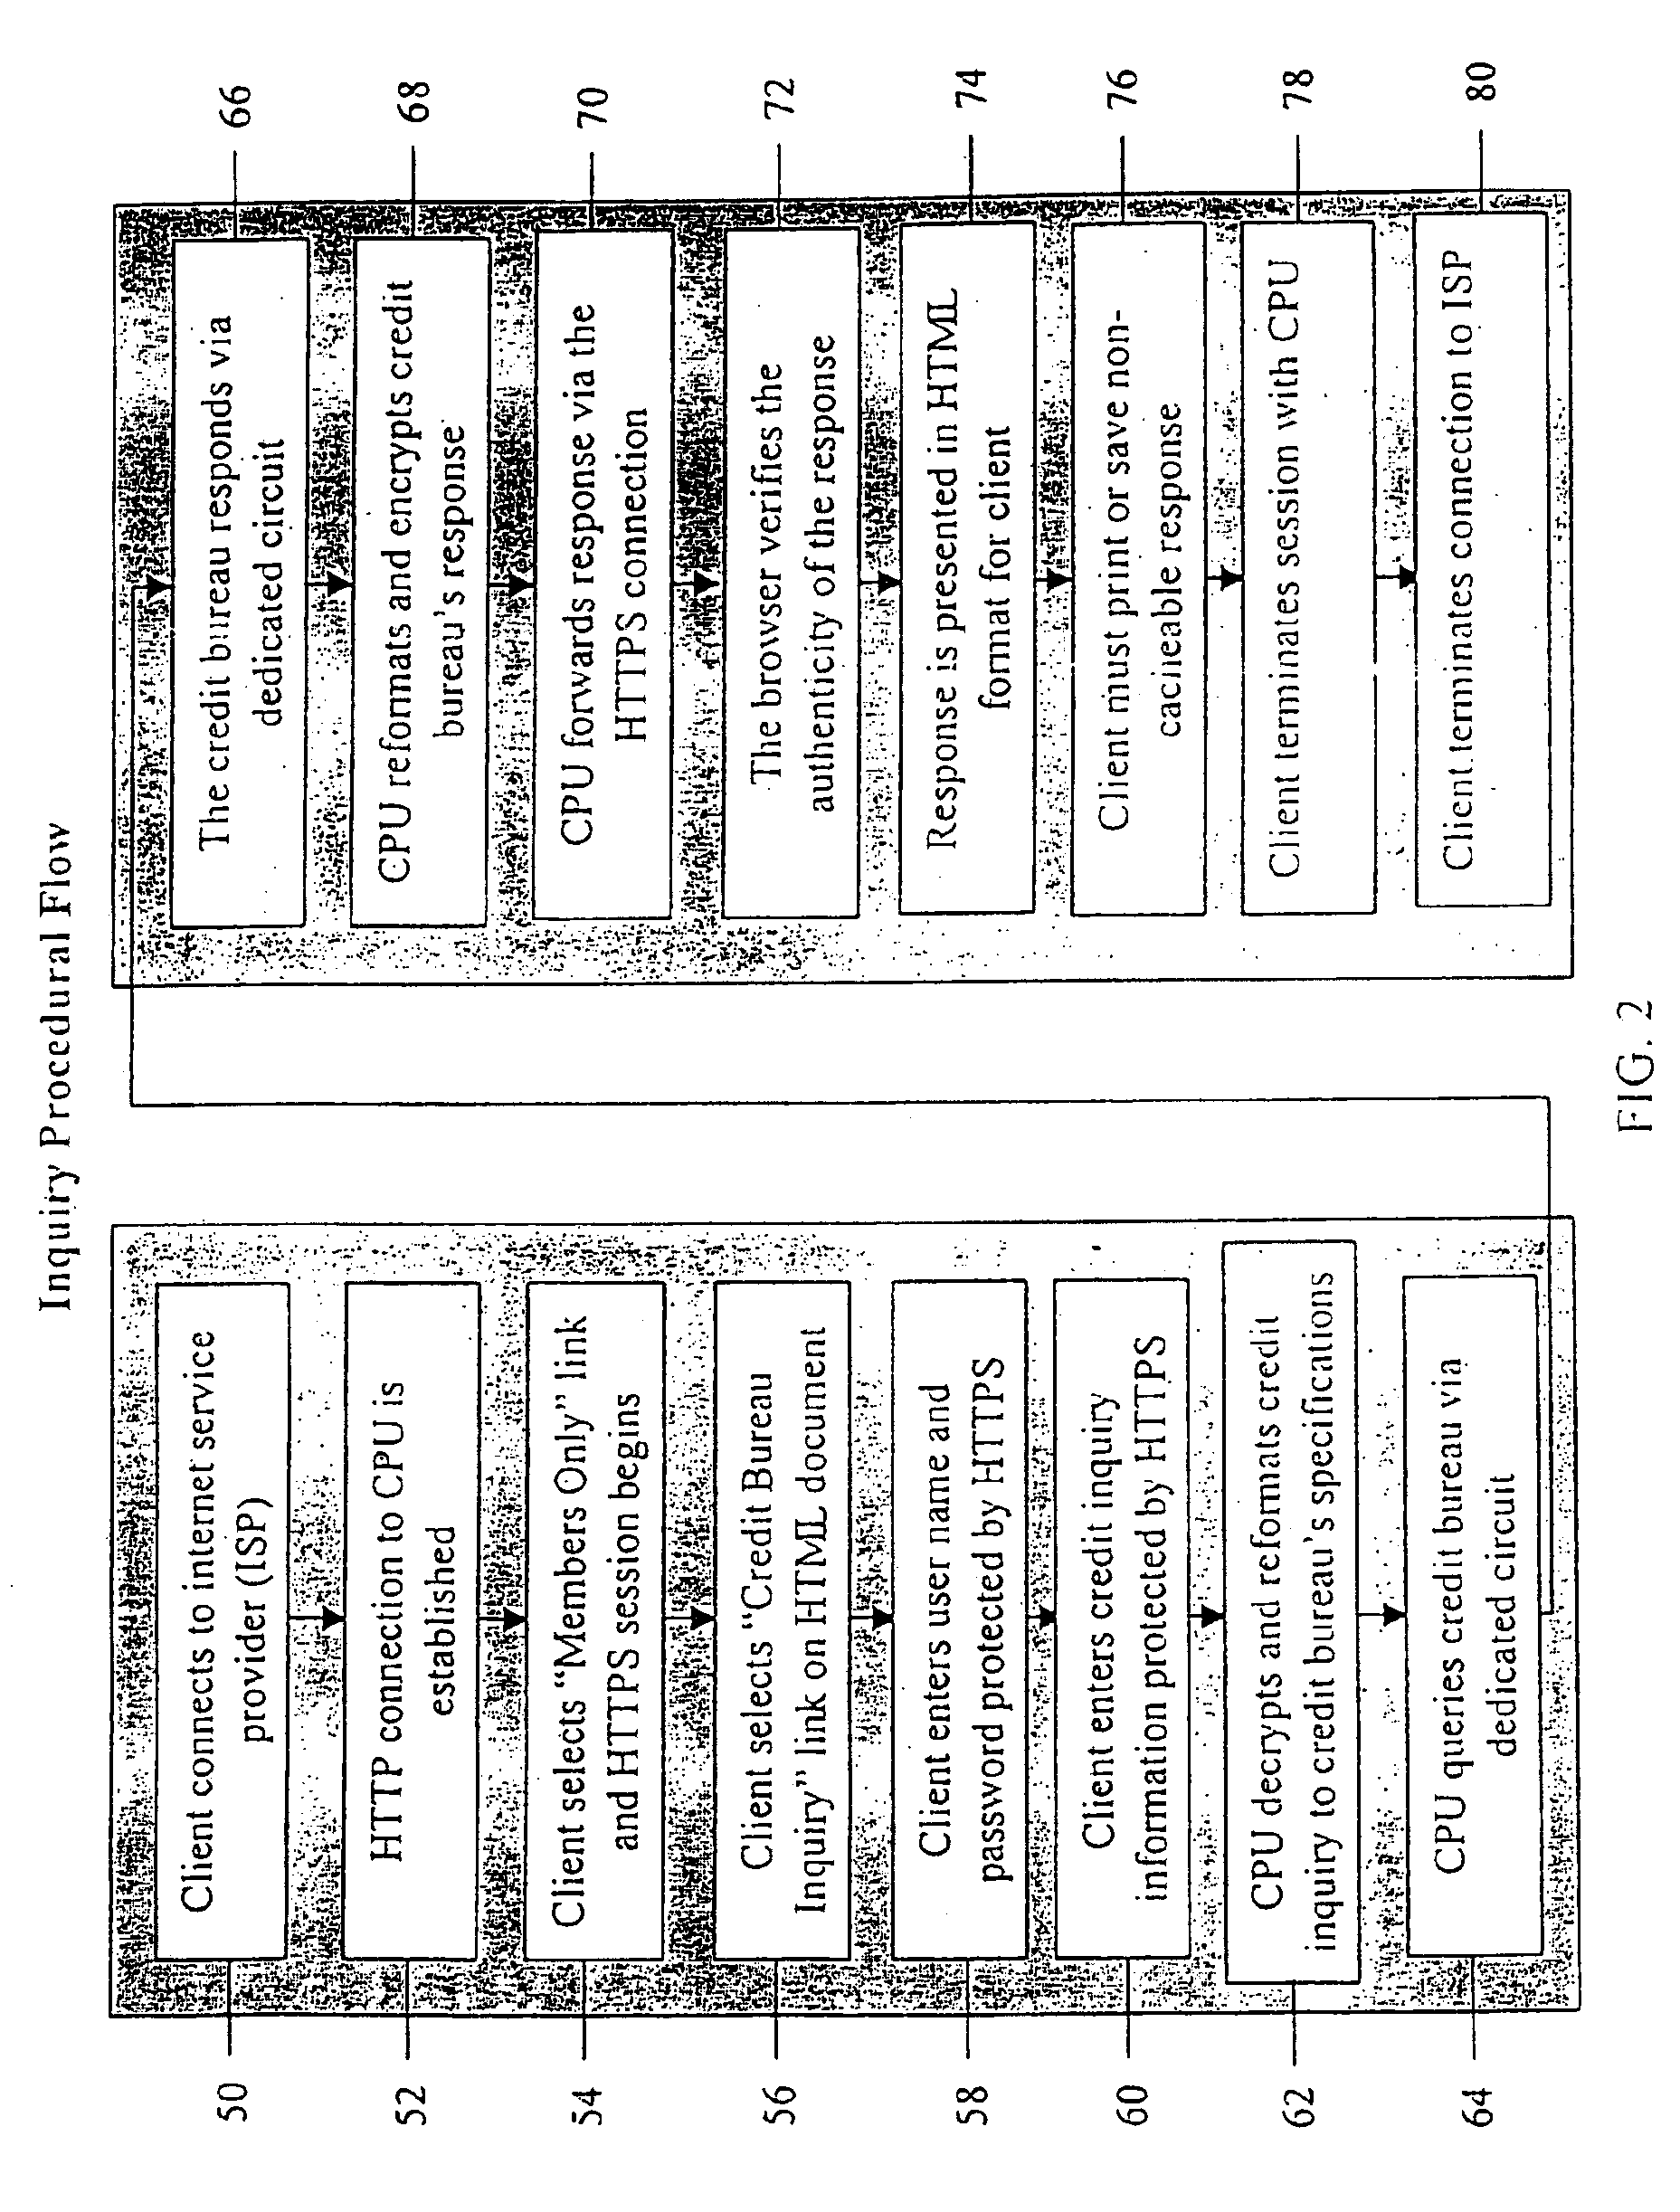 System and method for real-time electronic inquiry, delivery, and reporting of credit information